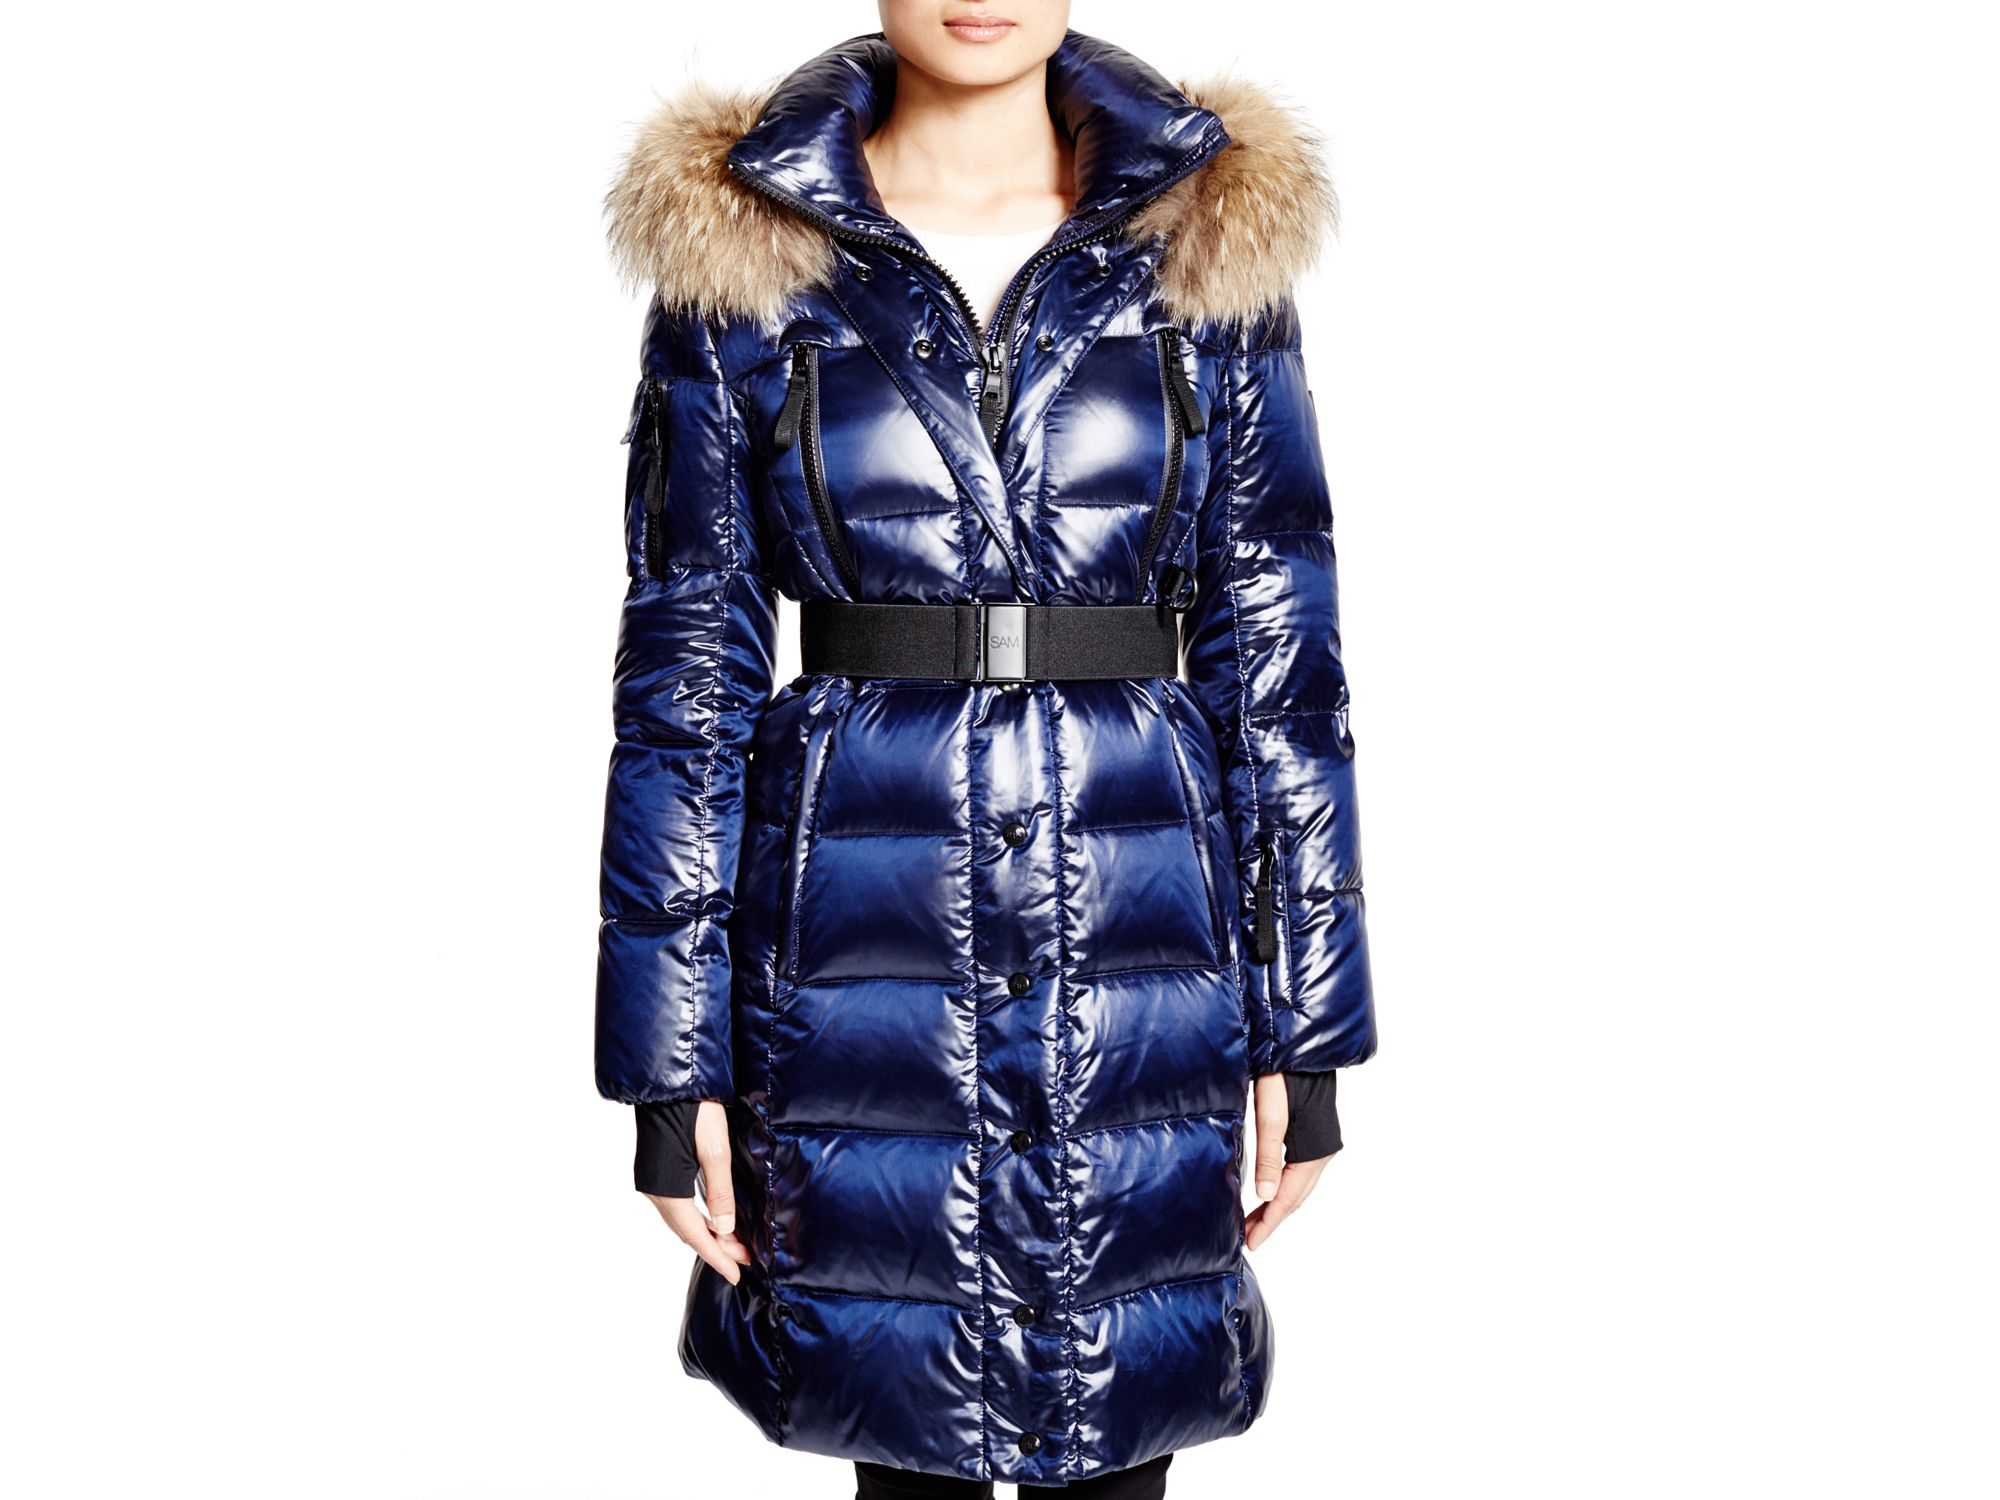 Lyst - Sam. Coat - Infinity Belted in Blue